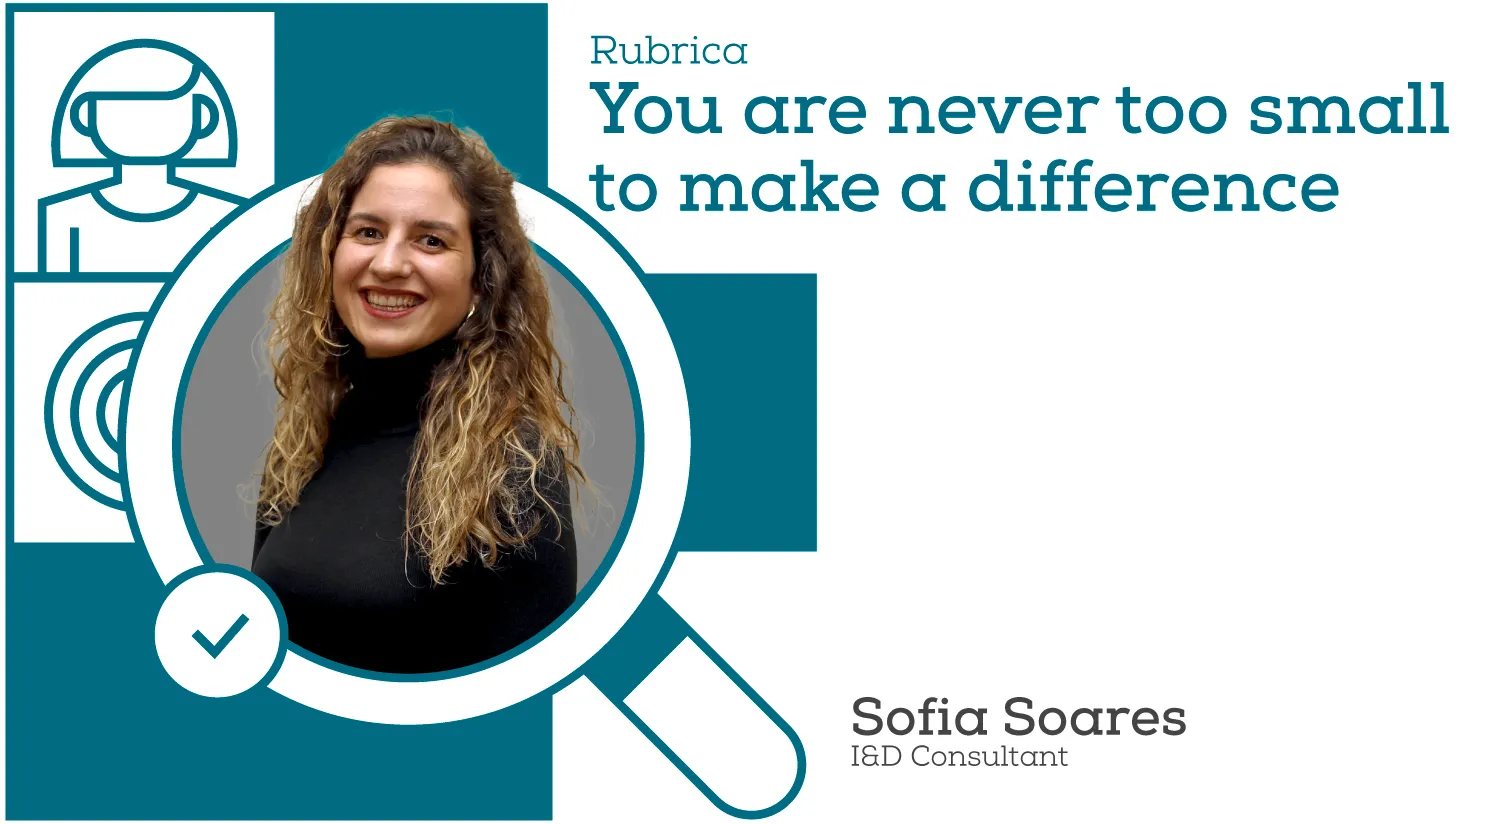 You are never too small to make a difference: Sofia Soares